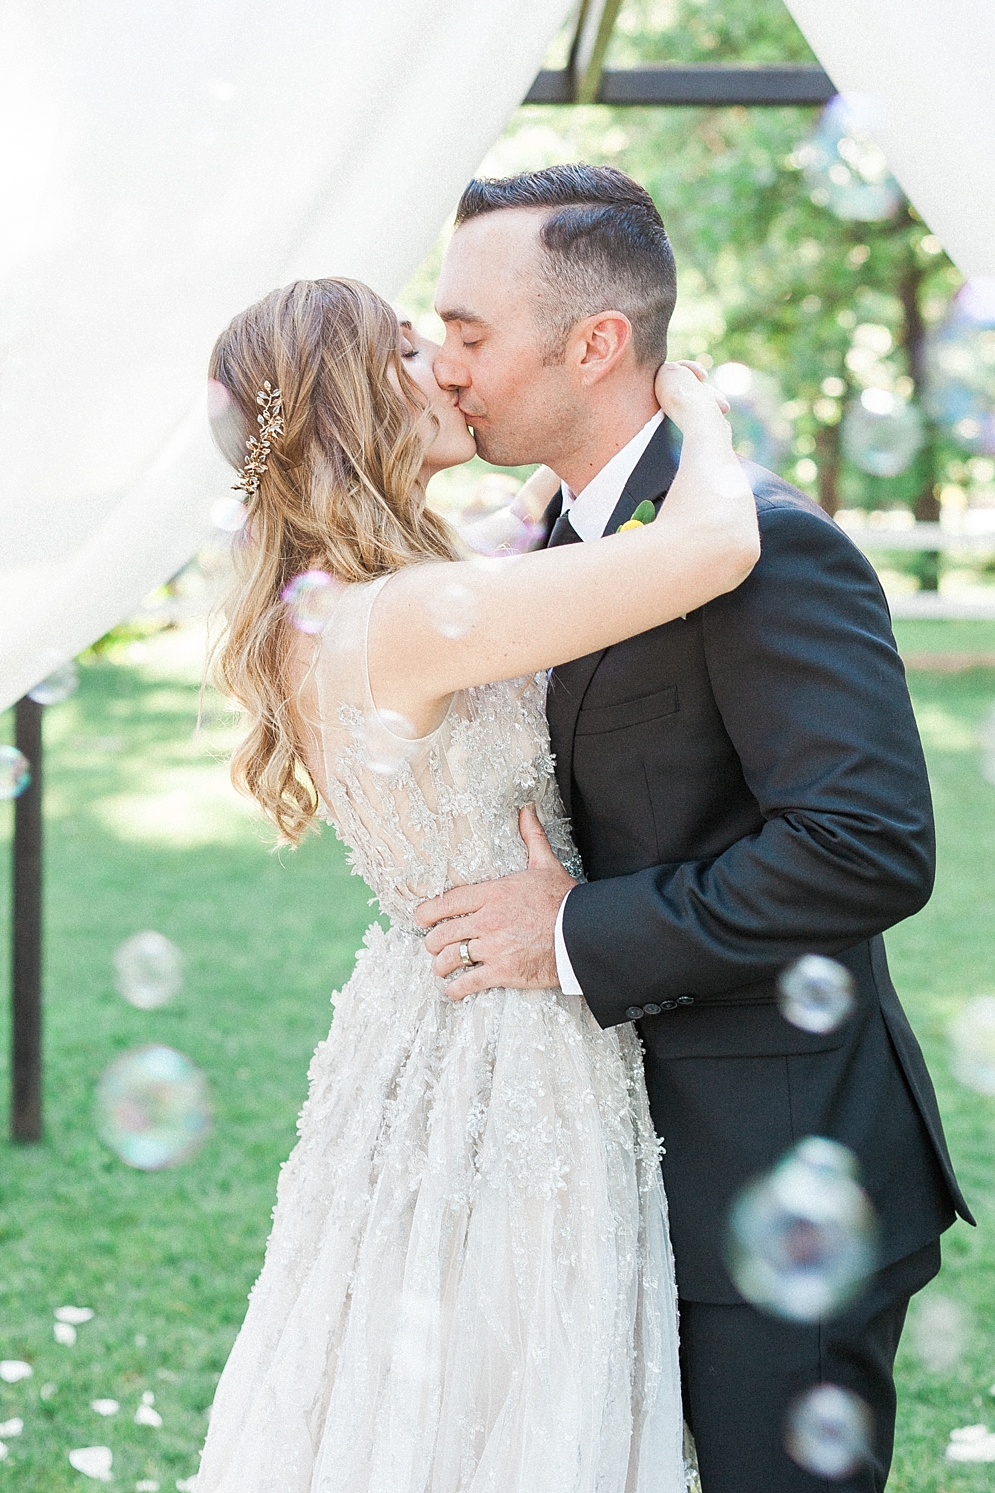 Chandler Hill Vineyards | ST. LOUIS JEWISH WEDDING TRADITIONS: CEREMONY | St. Louis Wedding Photographer | bride and groom holding one another and bubbles